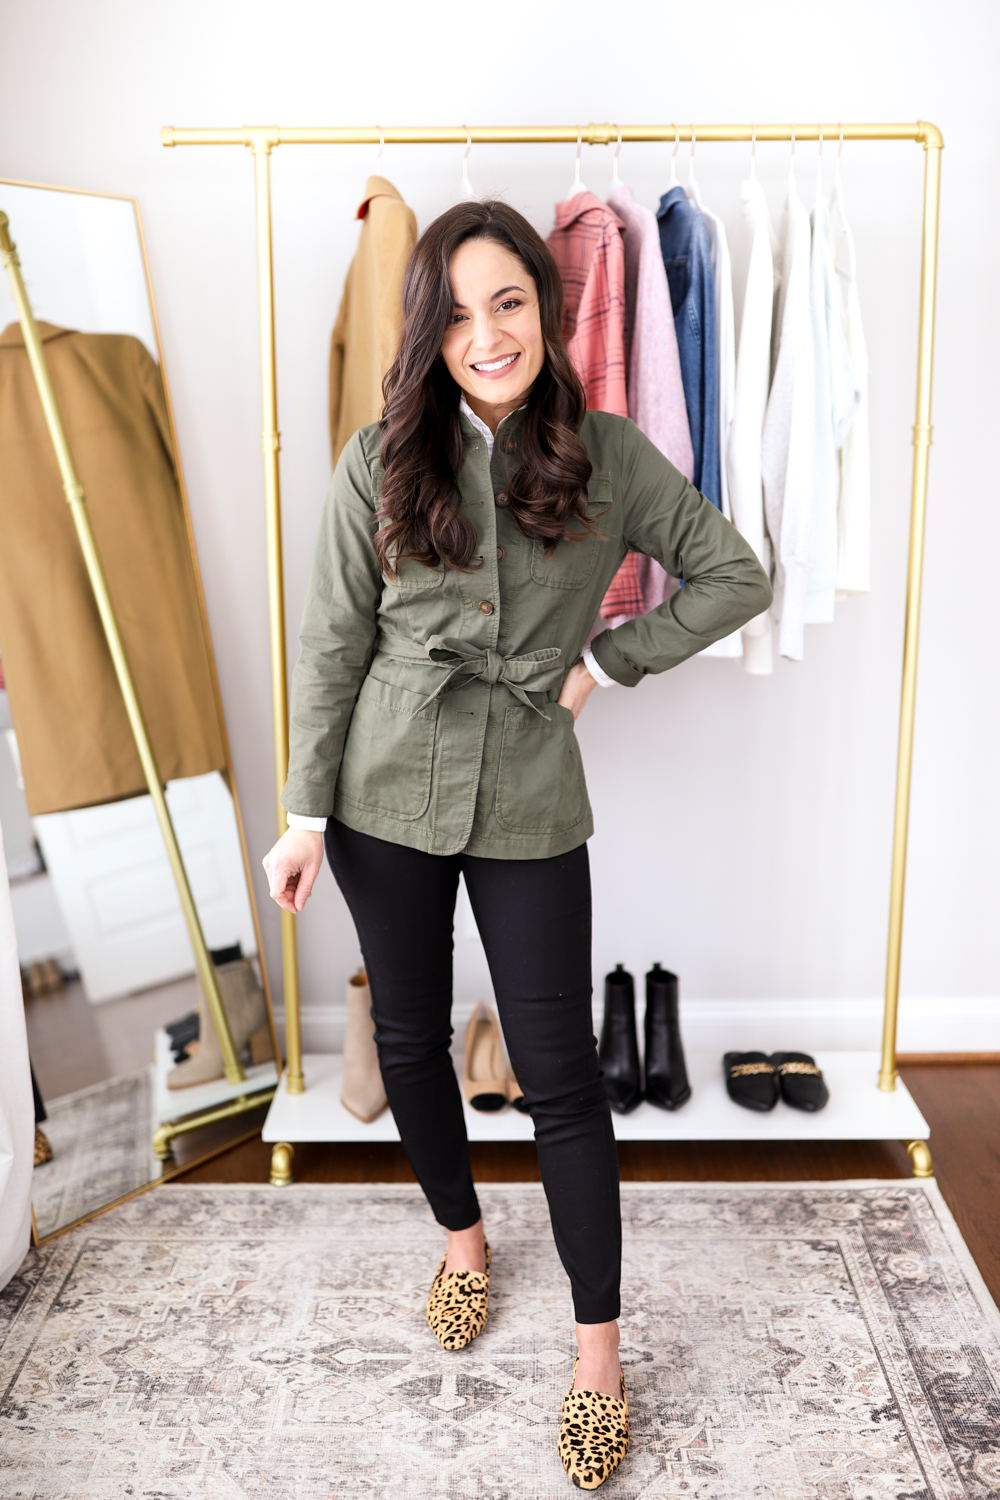 4 Ways to Wear an Olive Jacket - Pumps & Push Ups